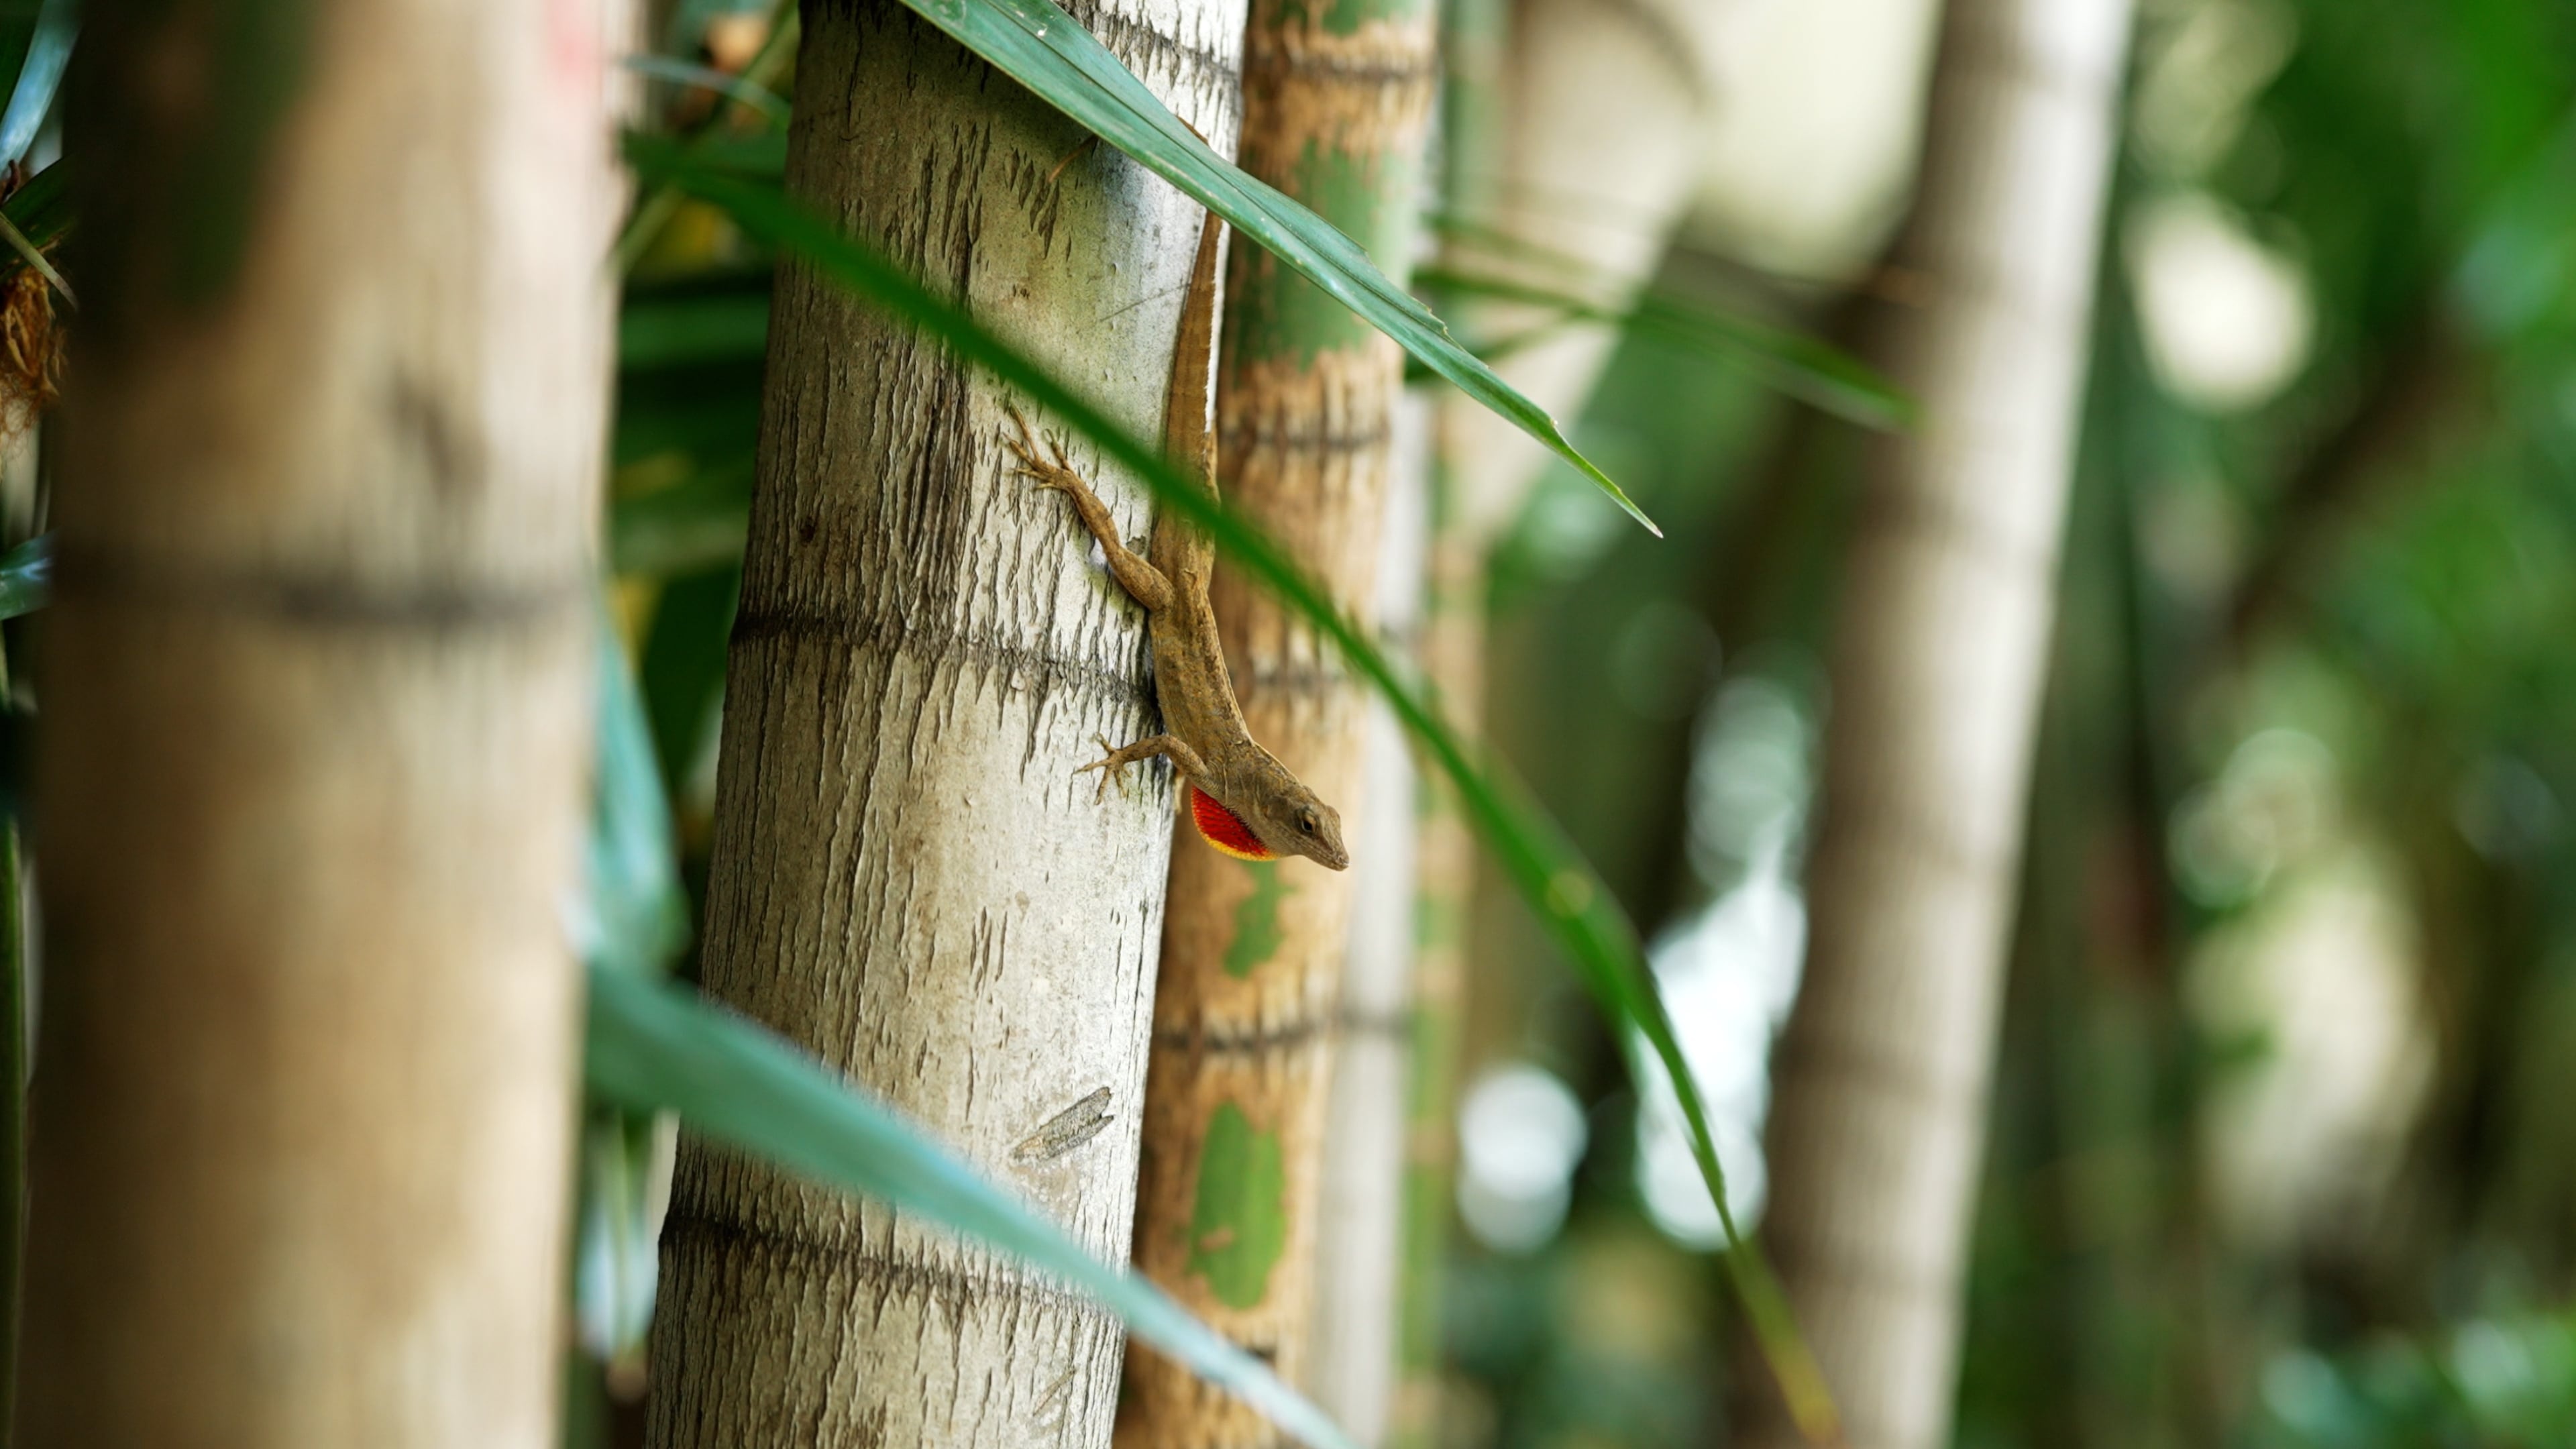 Bamboo: A lizard, Plant of a genus of perennial evergreen plants in the cereal family. 3840x2160 4K Wallpaper.